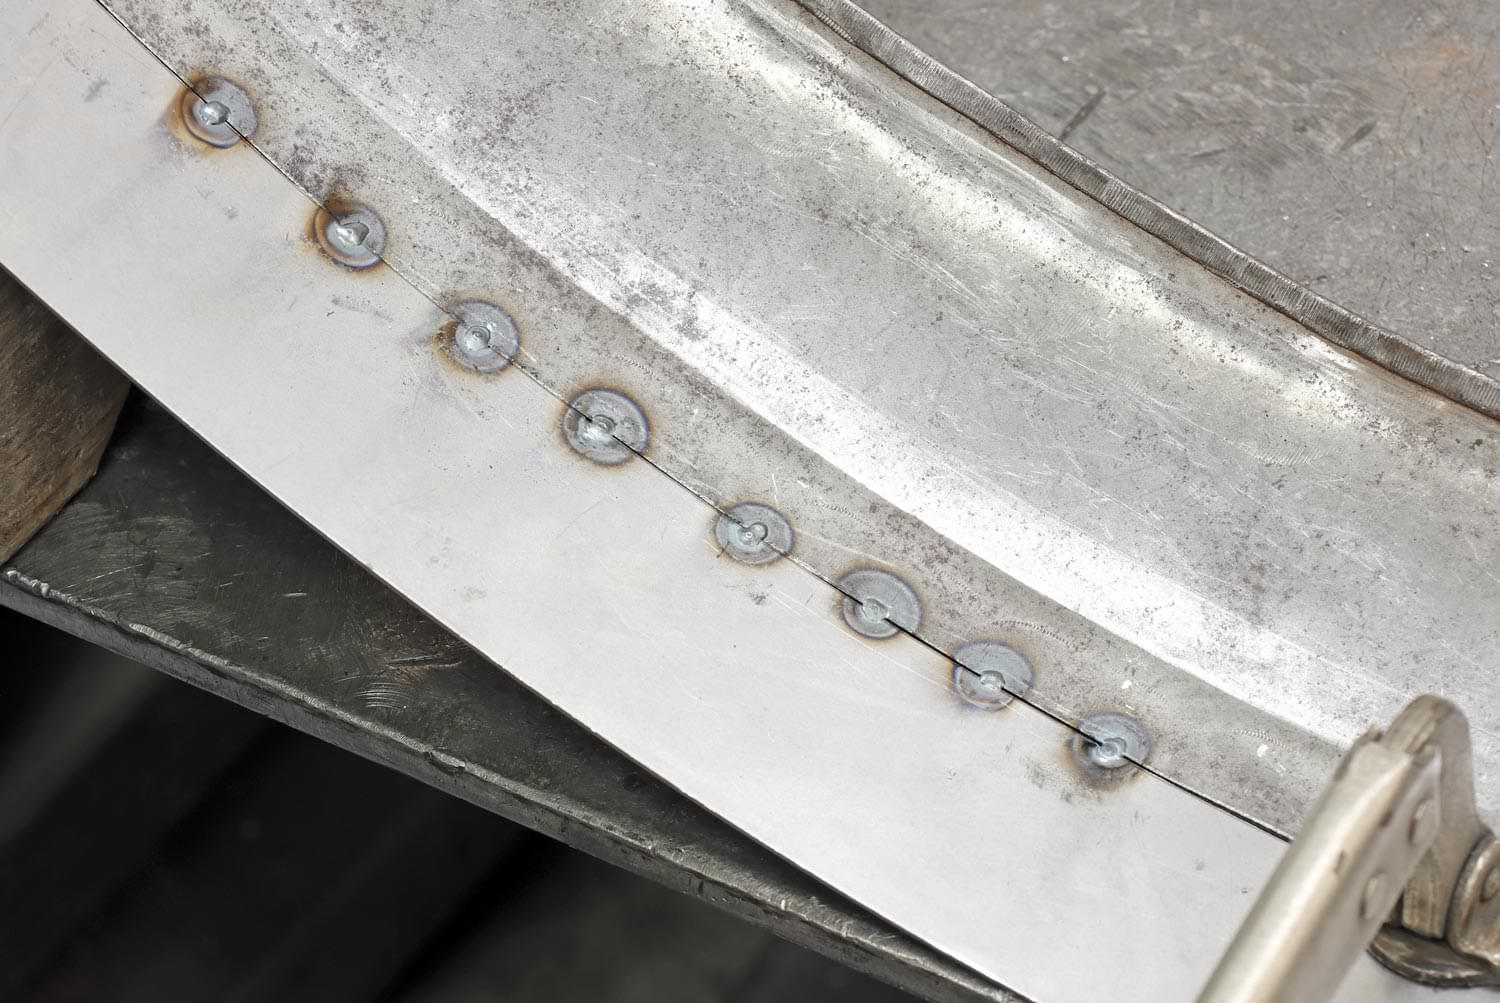 a close-up view of the tack welds